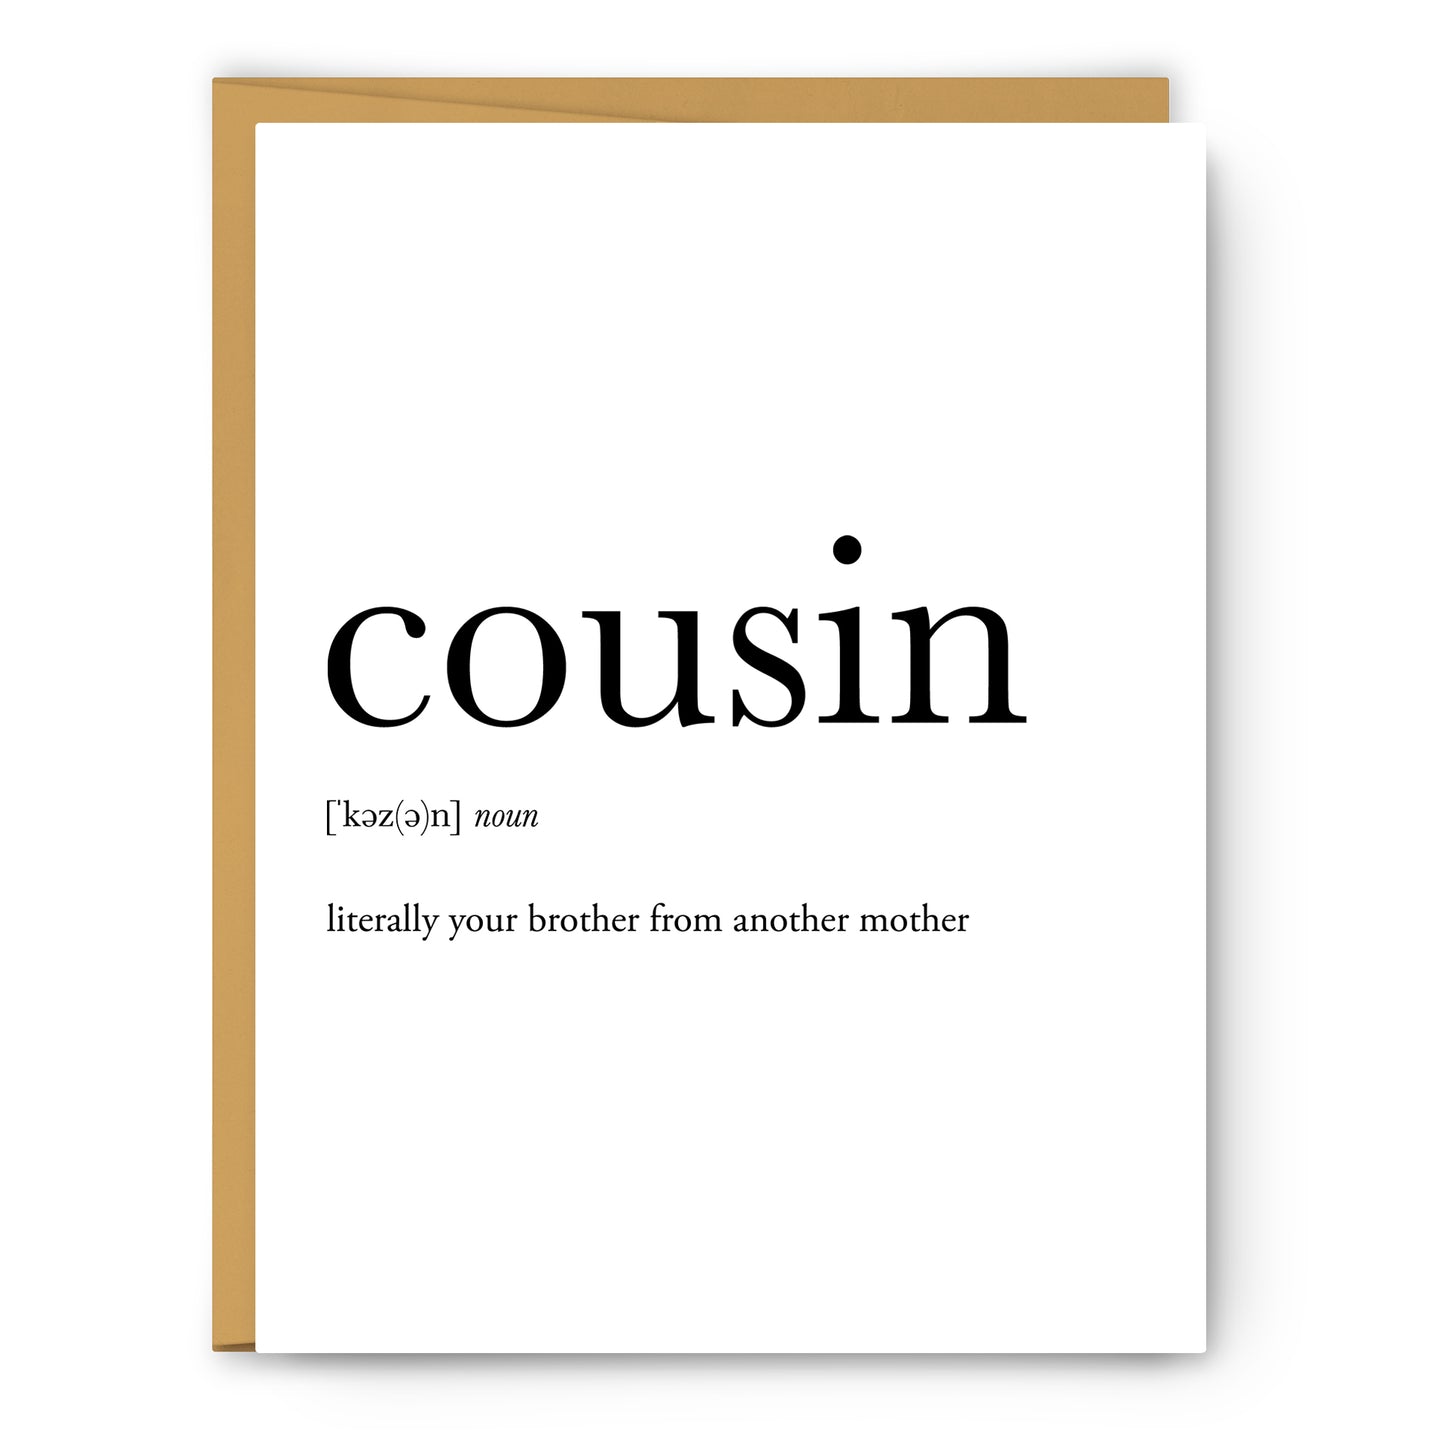 Cousin (Male) Definition - Unframed Art Print Or Greeting Card